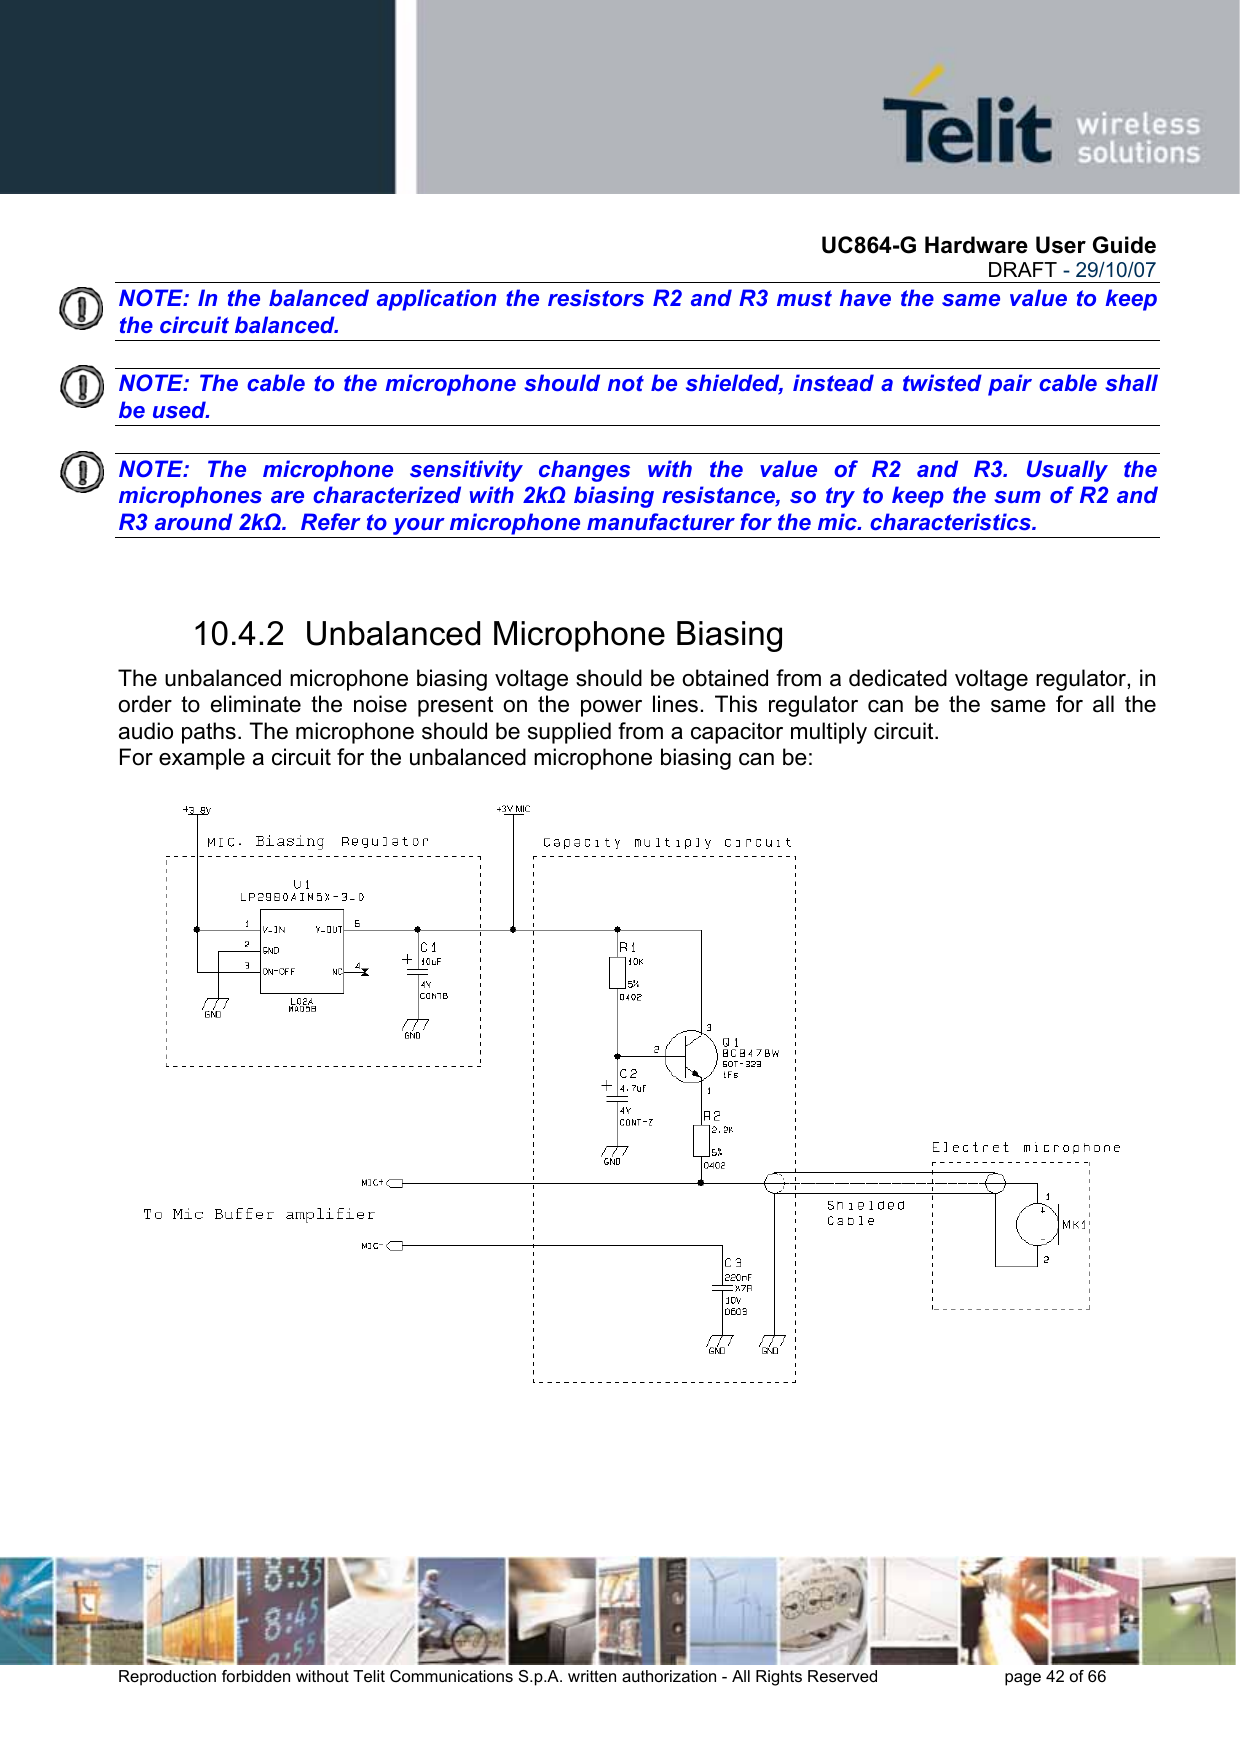       UC864-G Hardware User Guide  DRAFT - 29/10/07      Reproduction forbidden without Telit Communications S.p.A. written authorization - All Rights Reserved    page 42 of 66  NOTE: In the balanced application the resistors R2 and R3 must have the same value to keep the circuit balanced.    NOTE: The cable to the microphone should not be shielded, instead a twisted pair cable shall be used.    NOTE: The microphone sensitivity changes with the value of R2 and R3. Usually the microphones are characterized with 2kΩ biasing resistance, so try to keep the sum of R2 and R3 around 2kΩ.  Refer to your microphone manufacturer for the mic. characteristics.  10.4.2  Unbalanced Microphone Biasing The unbalanced microphone biasing voltage should be obtained from a dedicated voltage regulator, in order to eliminate the noise present on the power lines. This regulator can be the same for all the audio paths. The microphone should be supplied from a capacitor multiply circuit. For example a circuit for the unbalanced microphone biasing can be: 